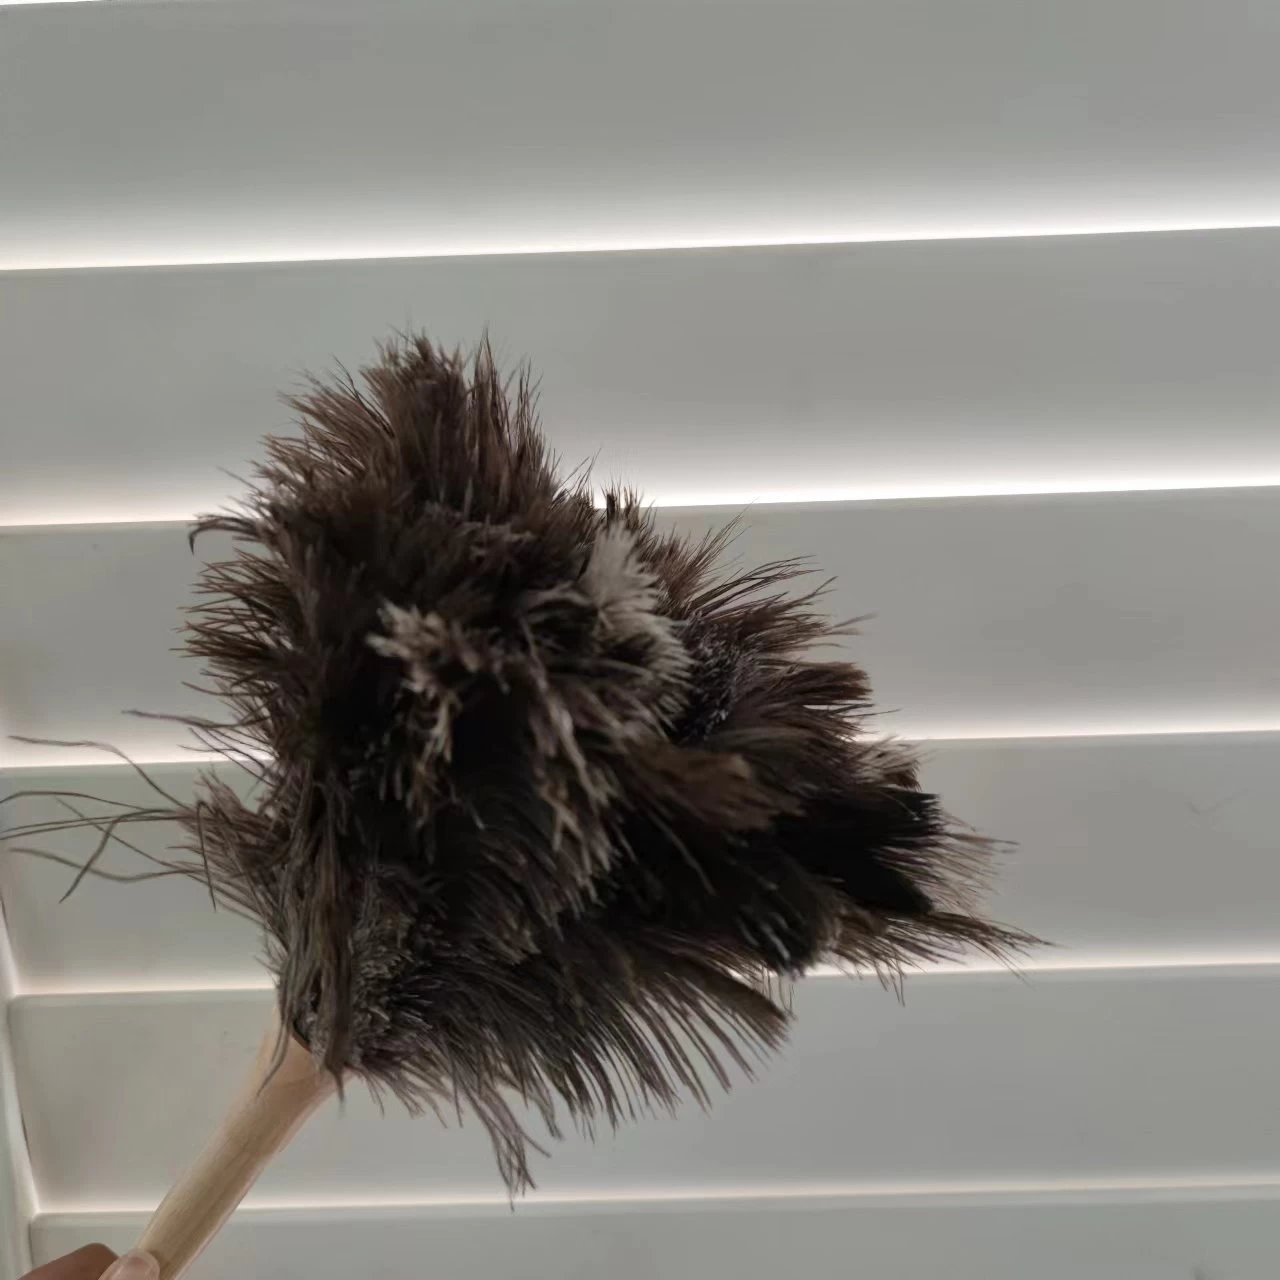 2022 new product ostrich feather duster,China ostrich feather duster supplier, China ostrich feather duster manufacturer,ostrich feather duster clean the plantation shutter